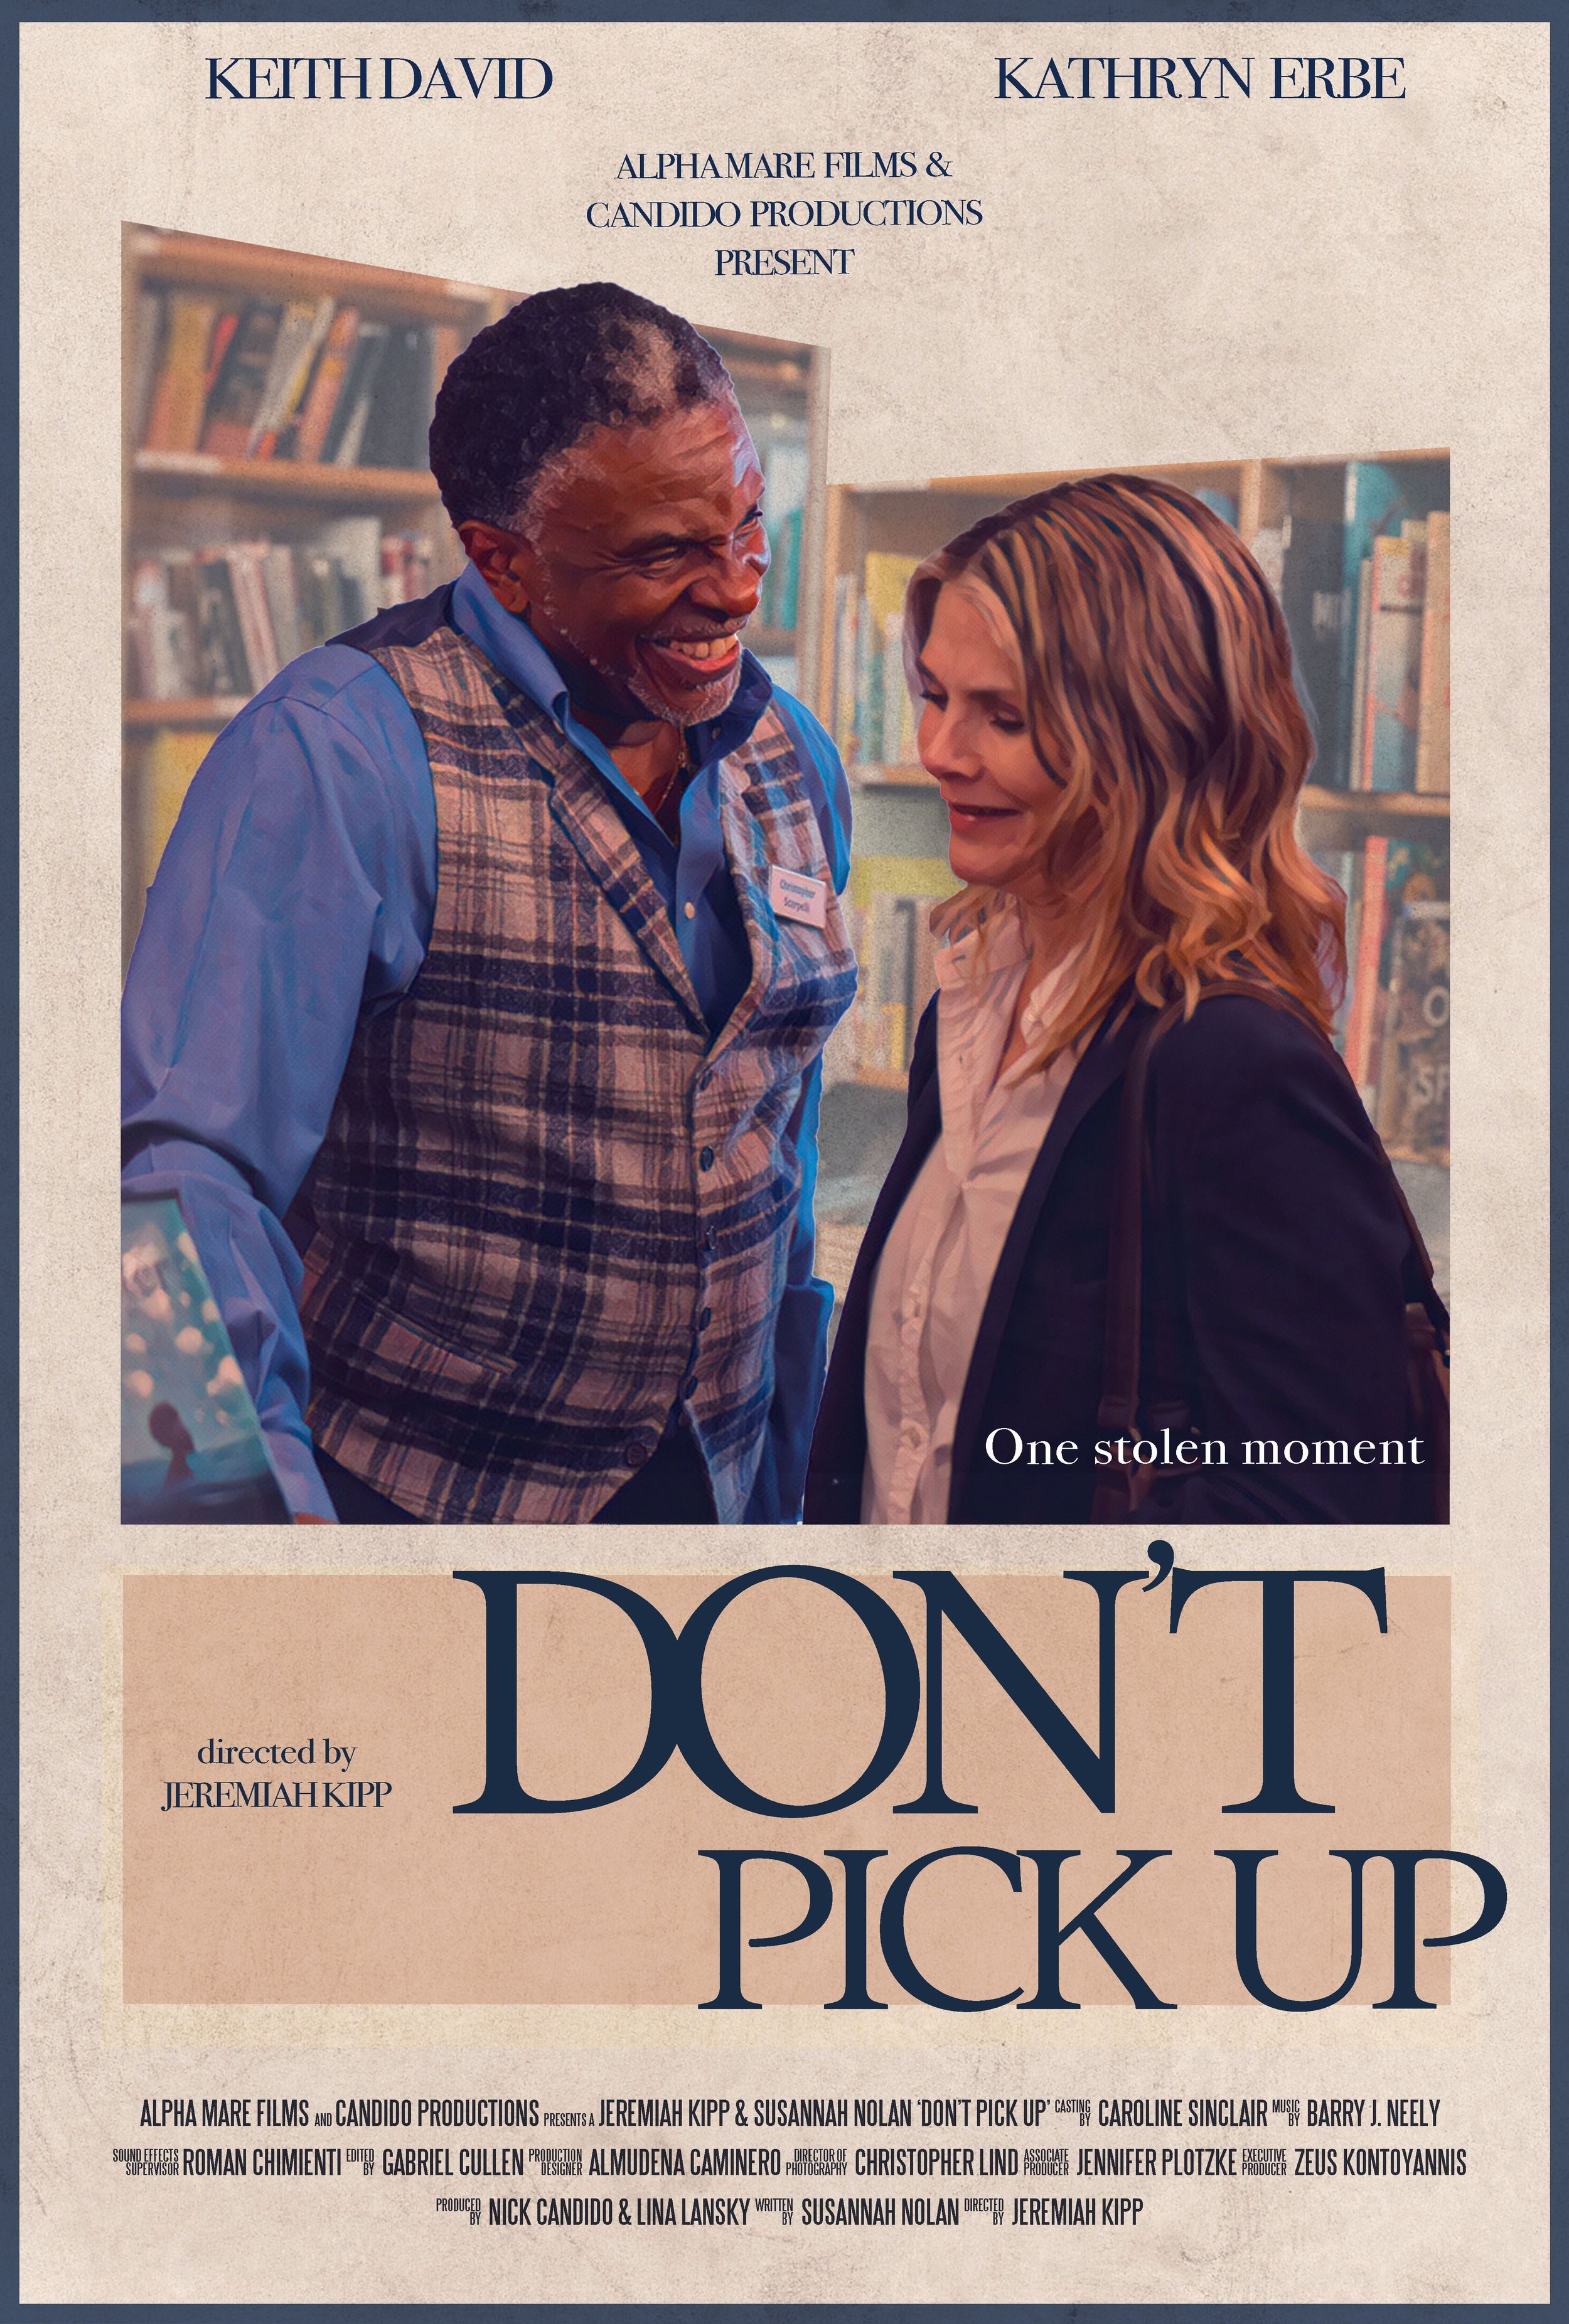 Don't Pick Up poster by PavelShatu (for web:small file).jpg